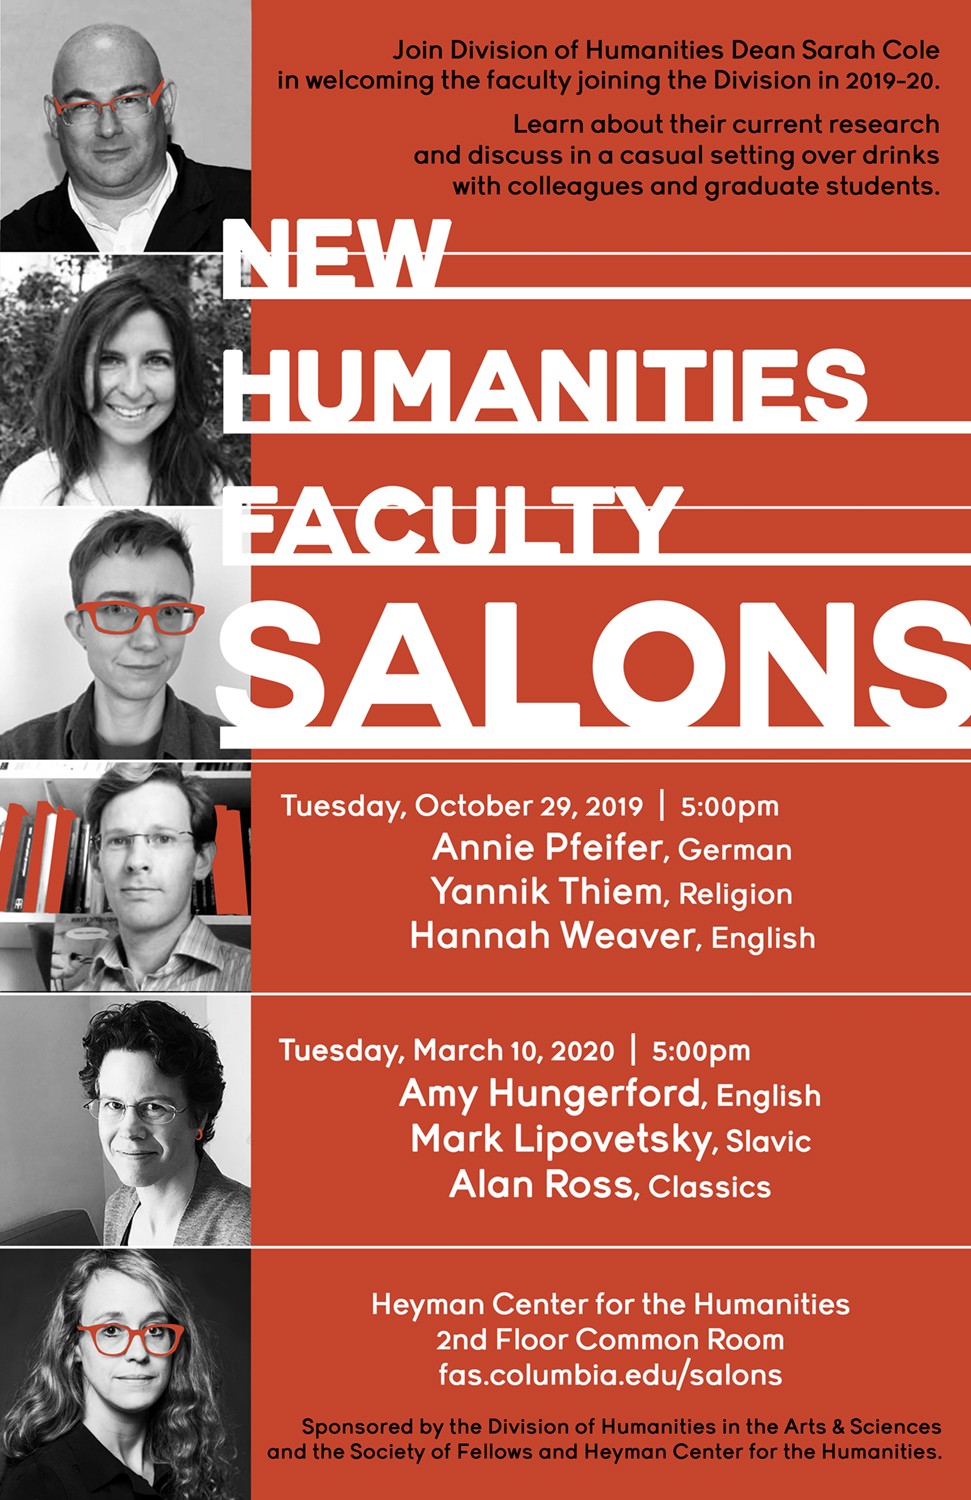 New Humanities Faculty Salon